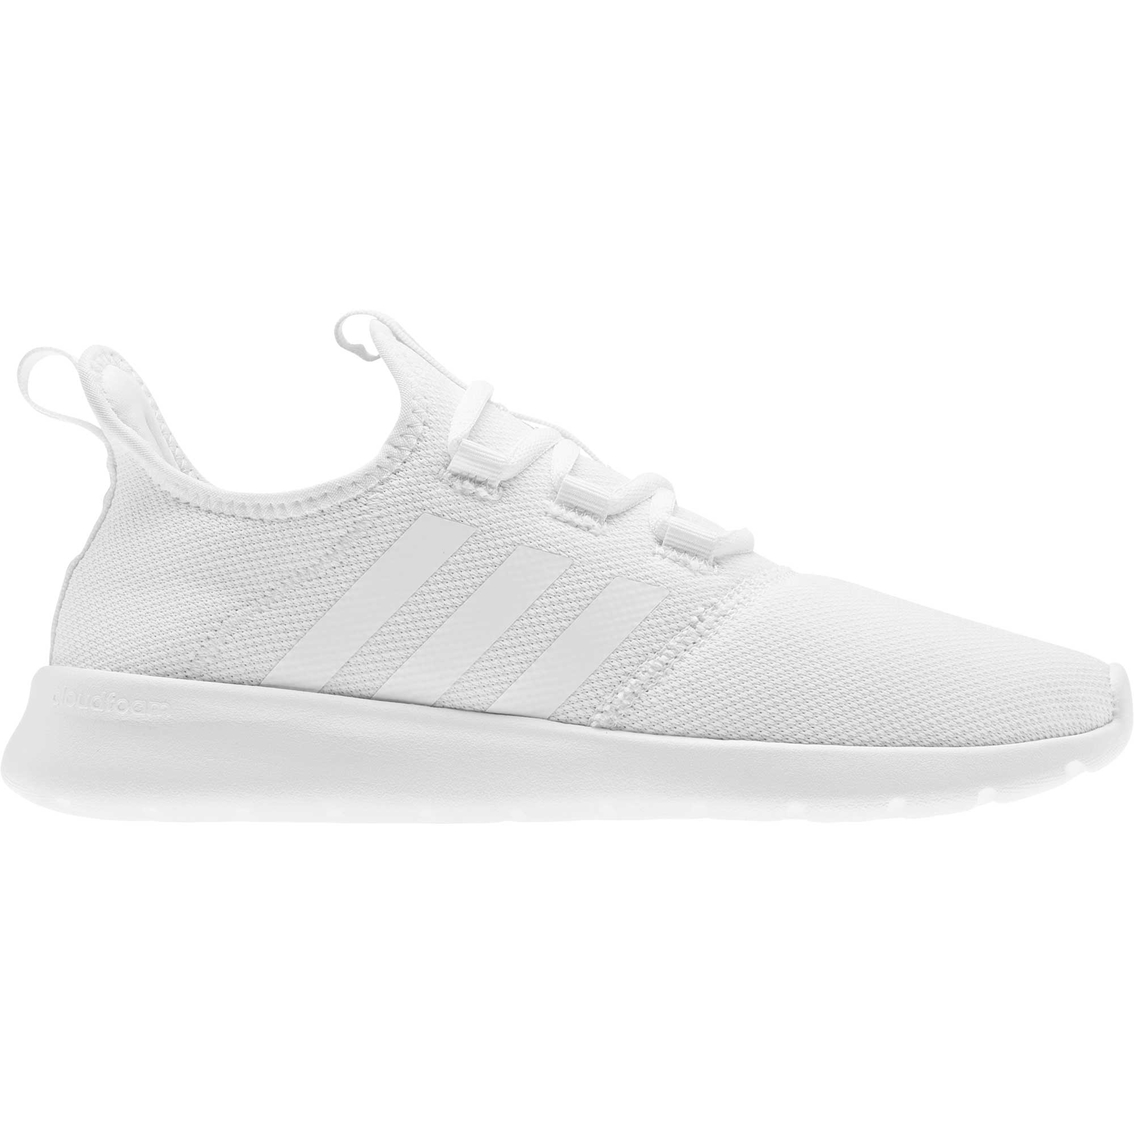 Adidas Women's Cloudfoam Pure 2.0 Sneakers - Image 3 of 10